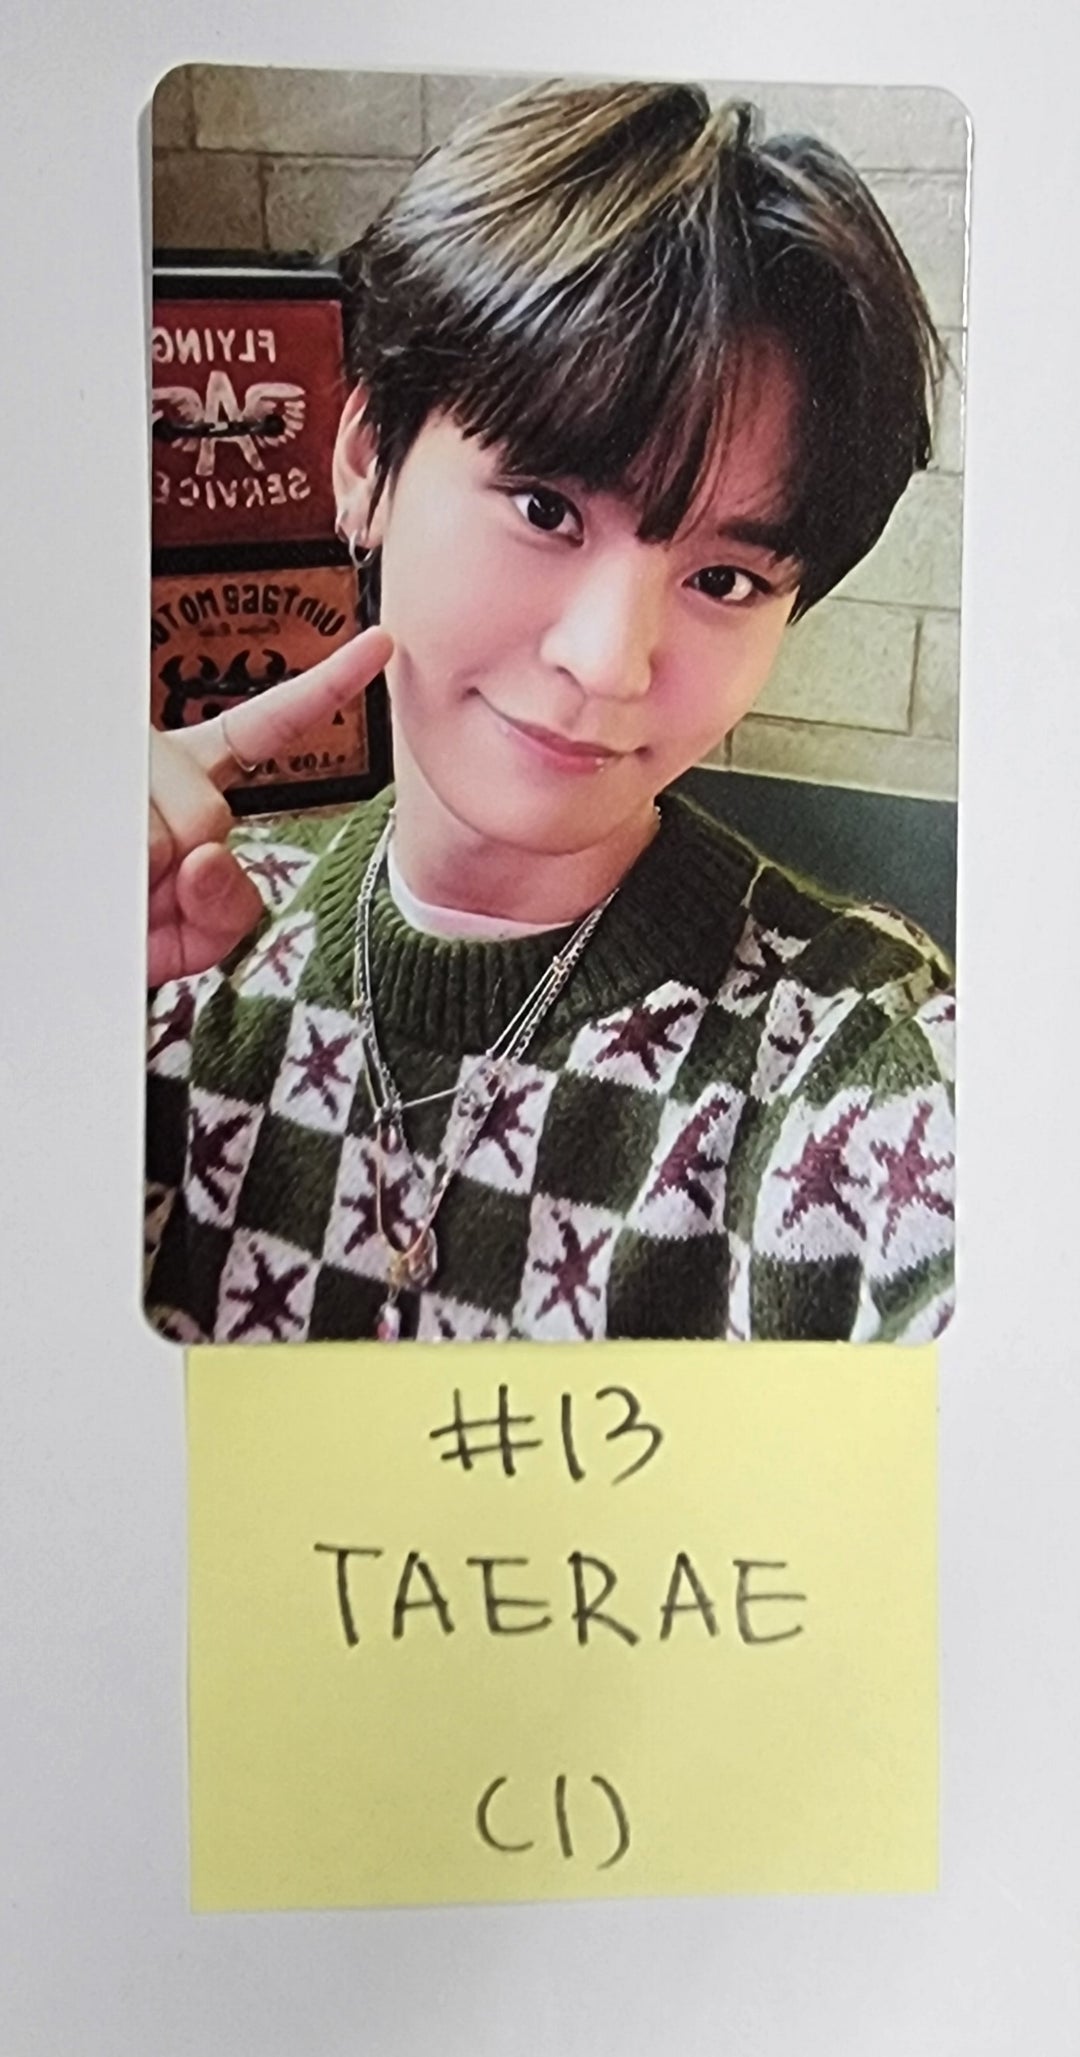 TEMPEST "ON and ON" 세 번째 미니앨범 - Official Photocard